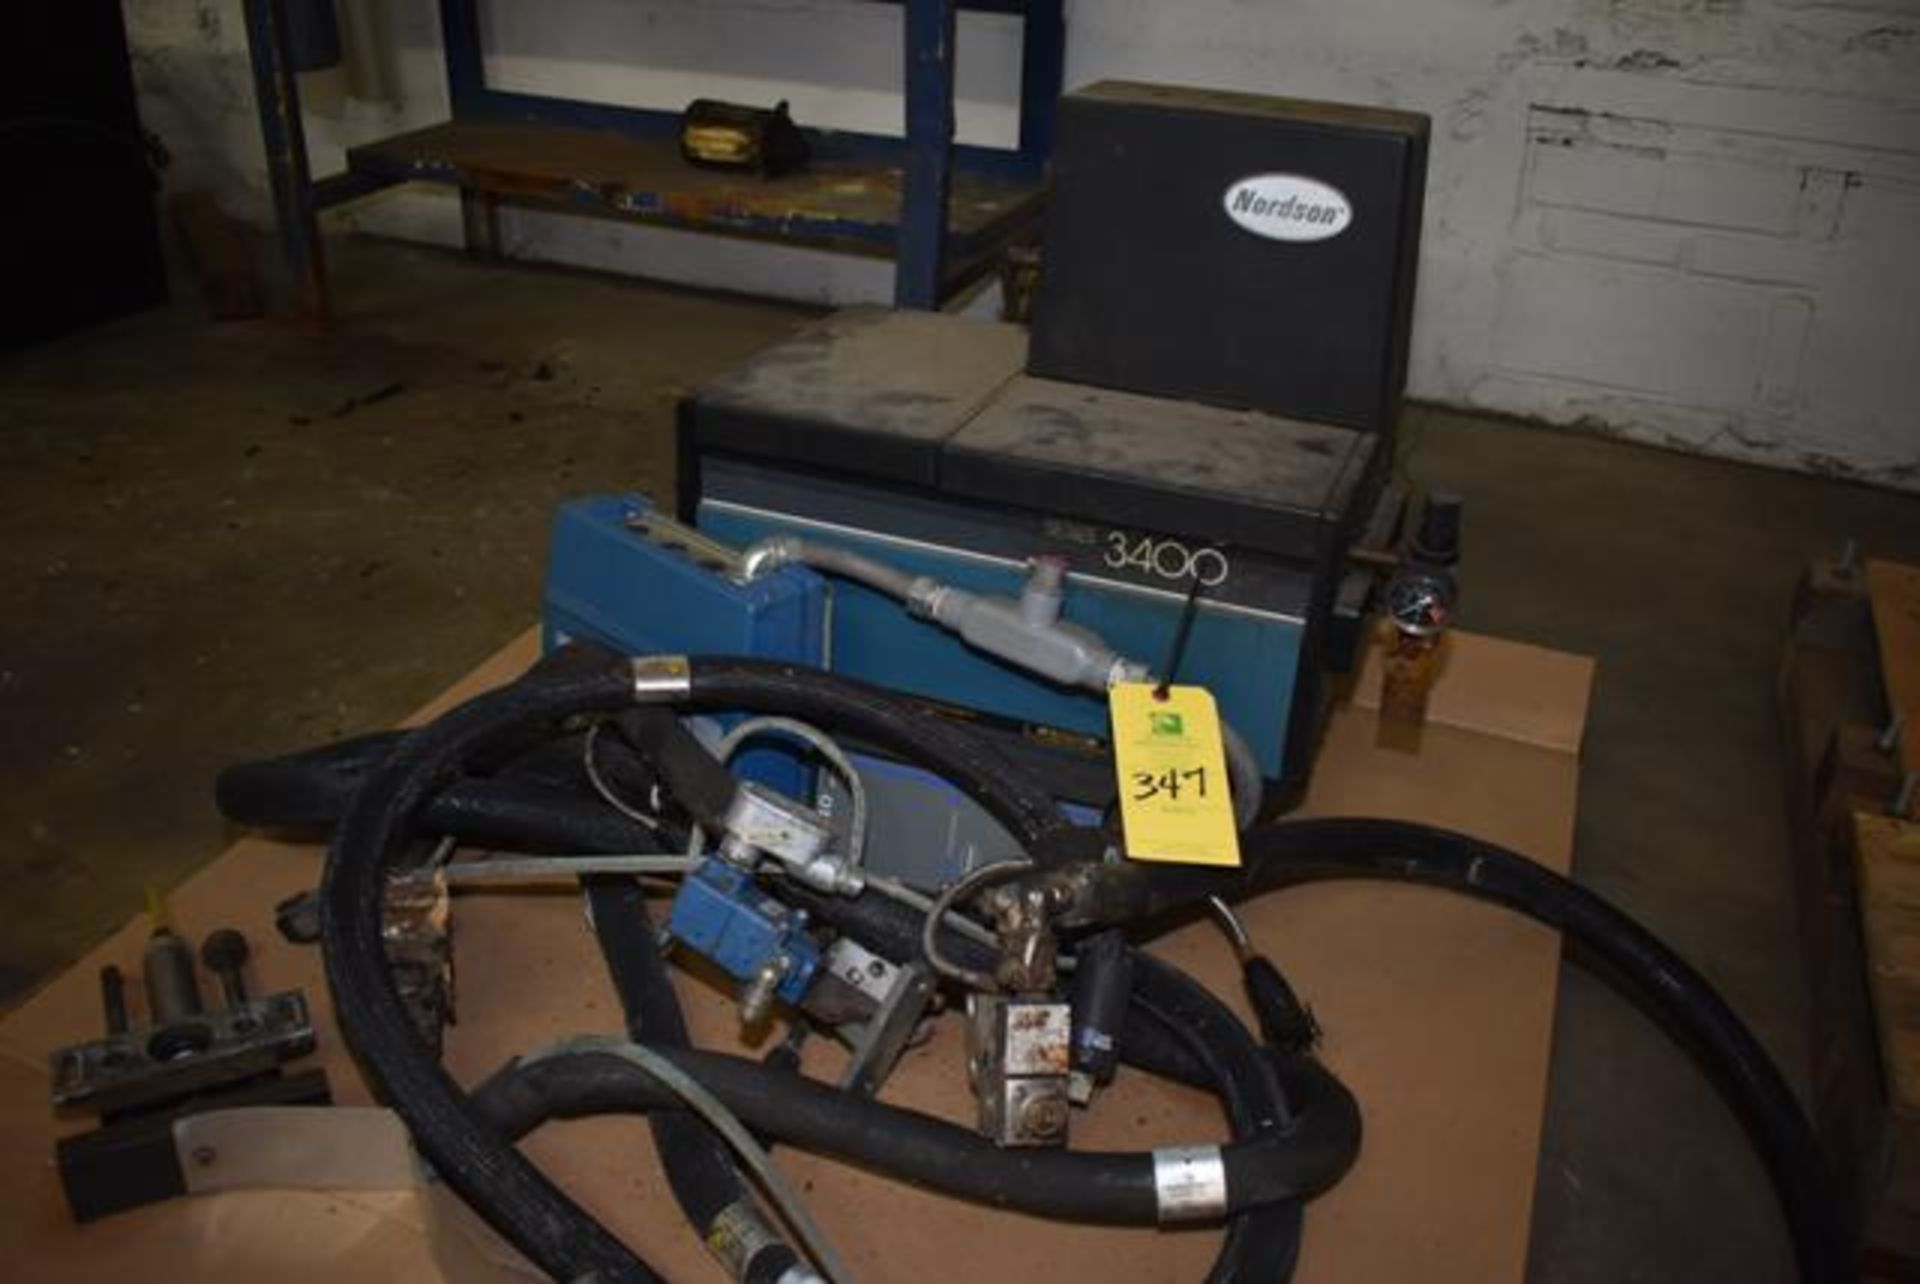 ( Late Delivery Item Expected Availability Mid May) Nordson Series 3400 Gluer, Loading Fee: $25